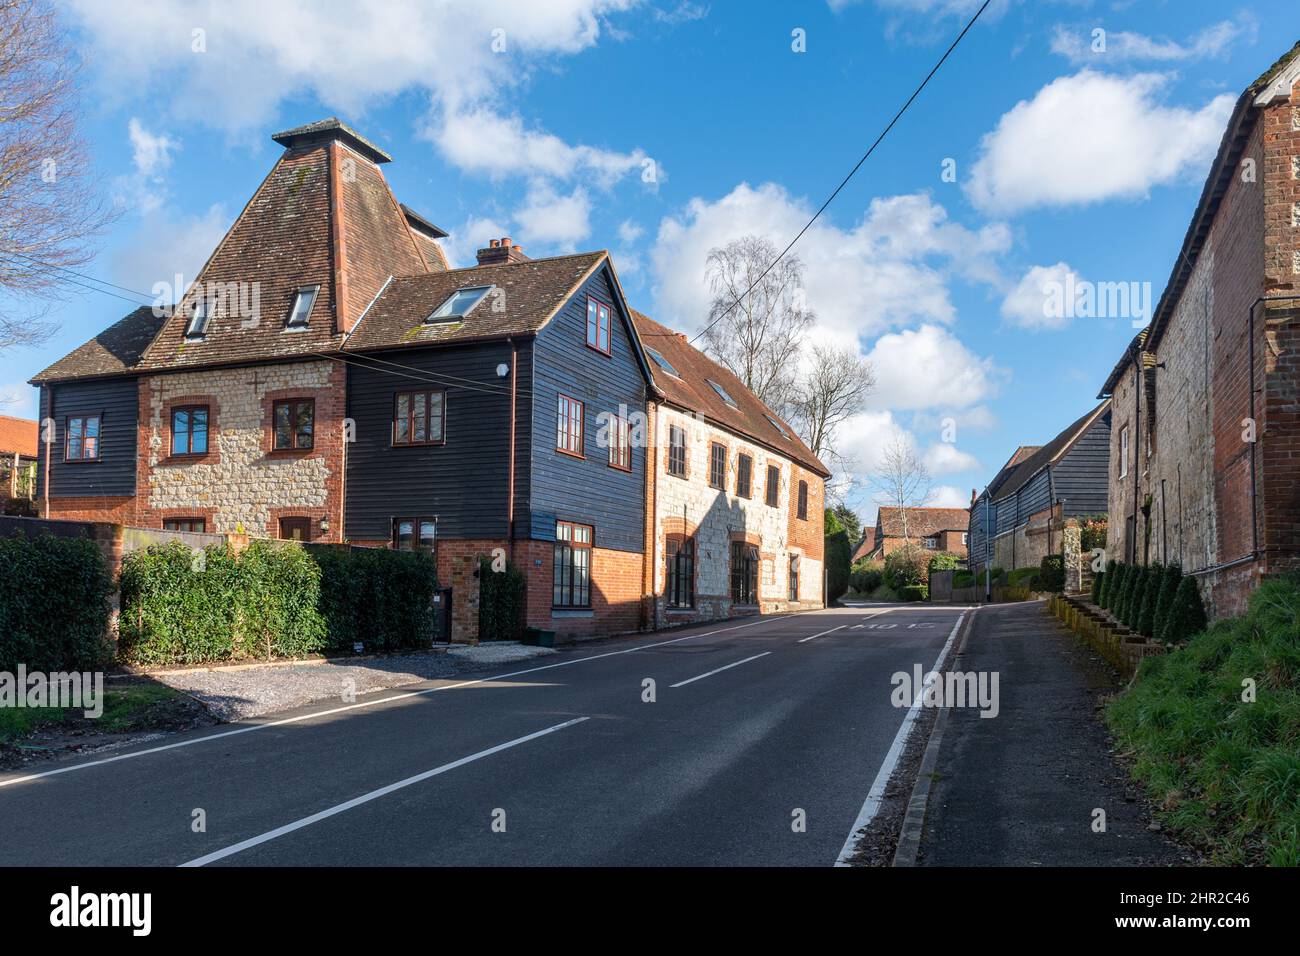 Inwood Kilns, former hop kiln or oast house converted into homes in The Street, Binsted village, Hampshire, England, UK Stock Photo